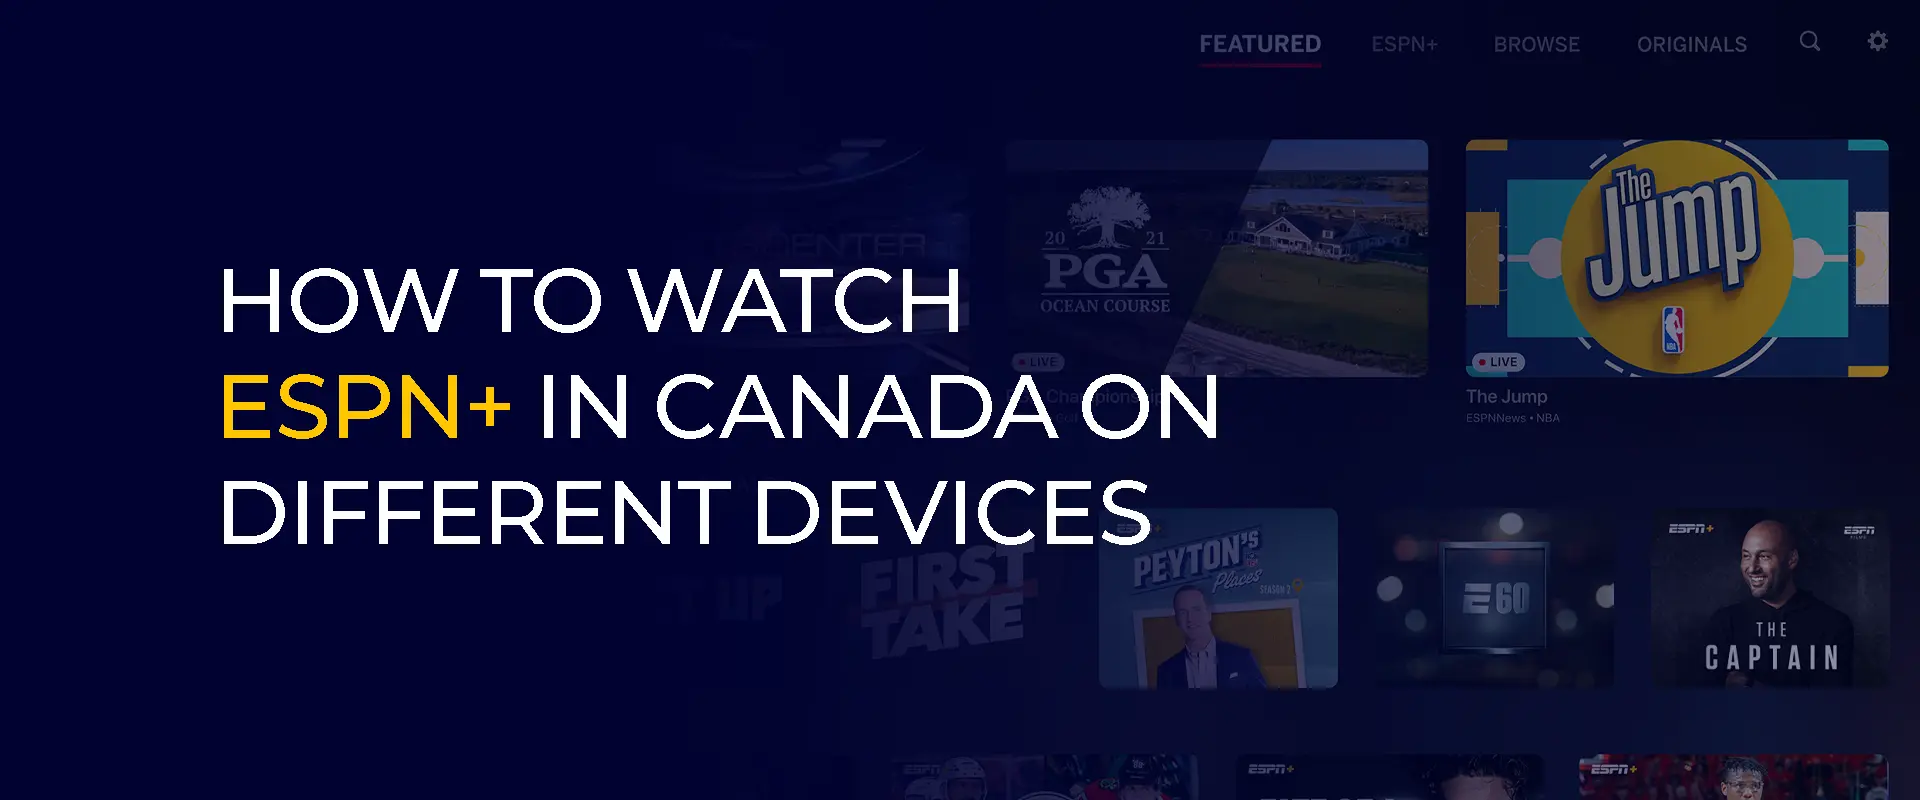 How to Watch ESPN+ in Canada on Different Devices